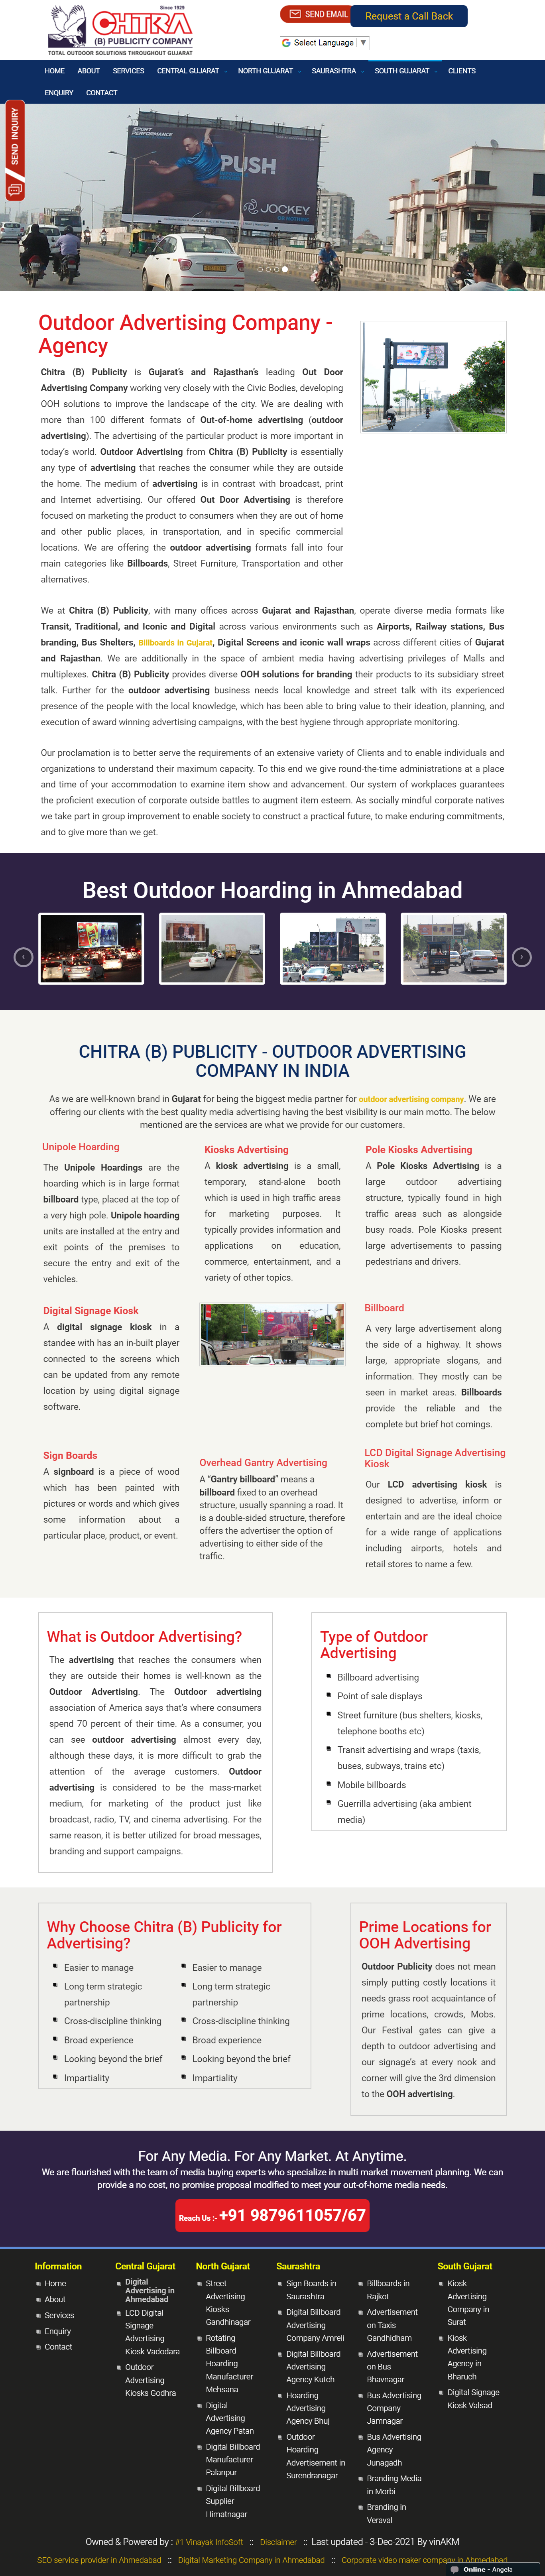 Outdoor advertising company